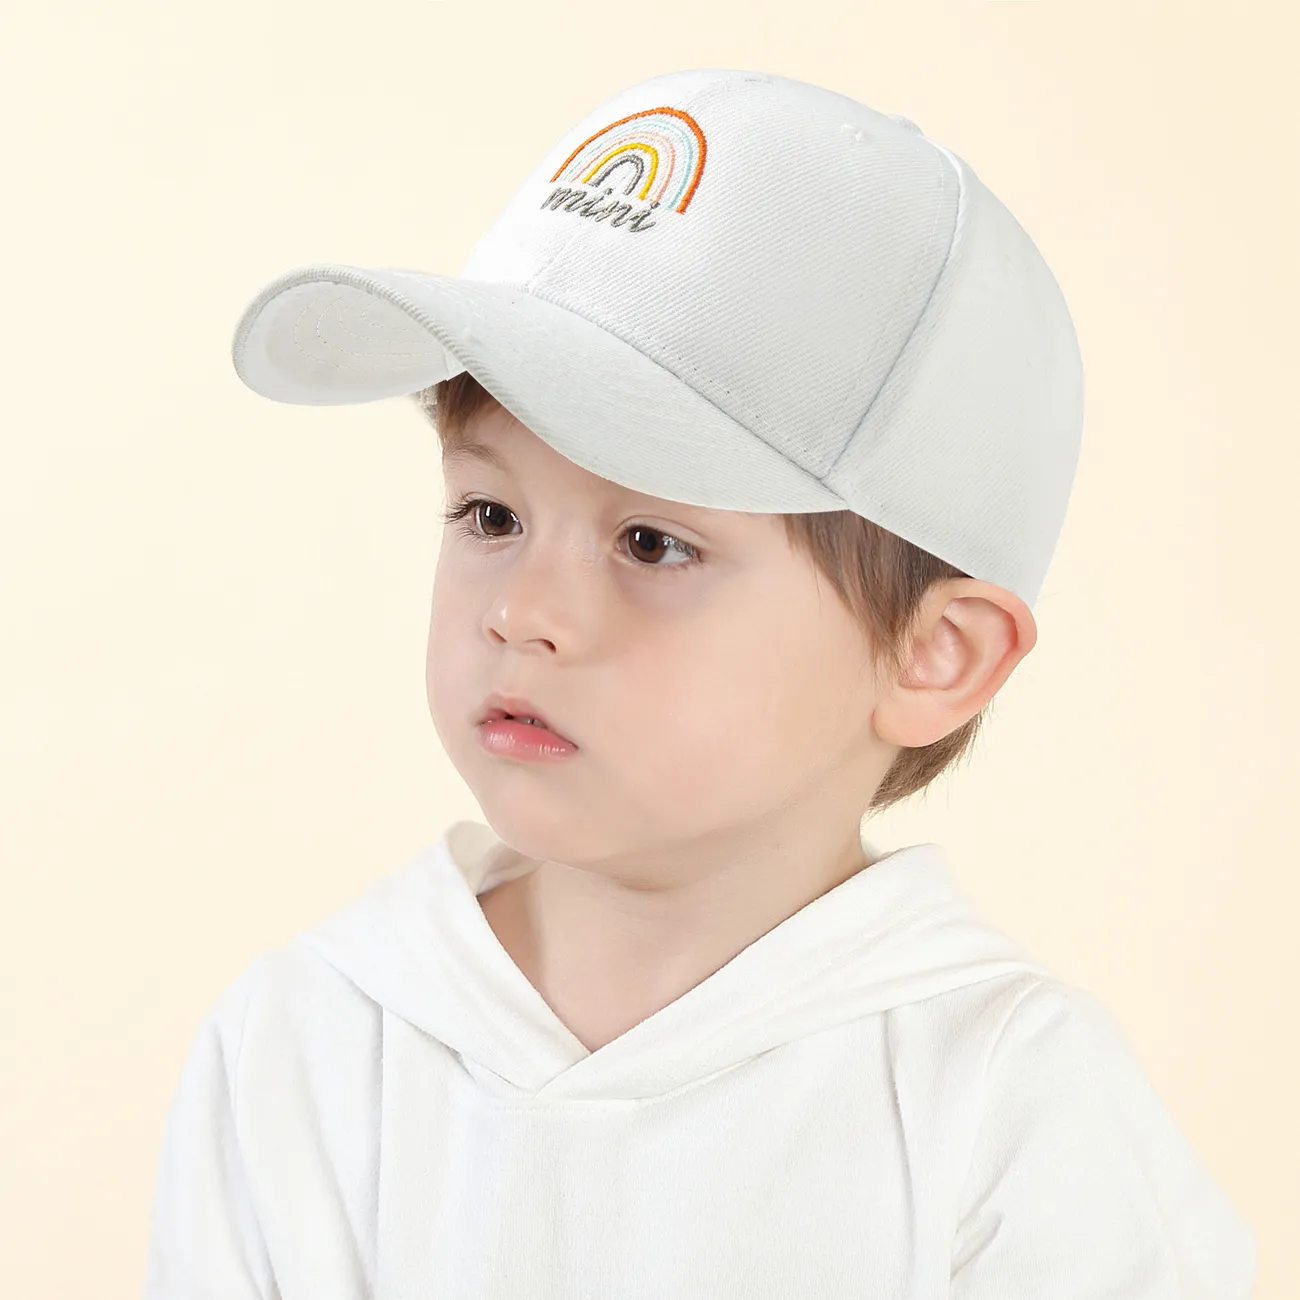 Rainbow Embroidery Baseball Cap for Mom and Me White big image 1